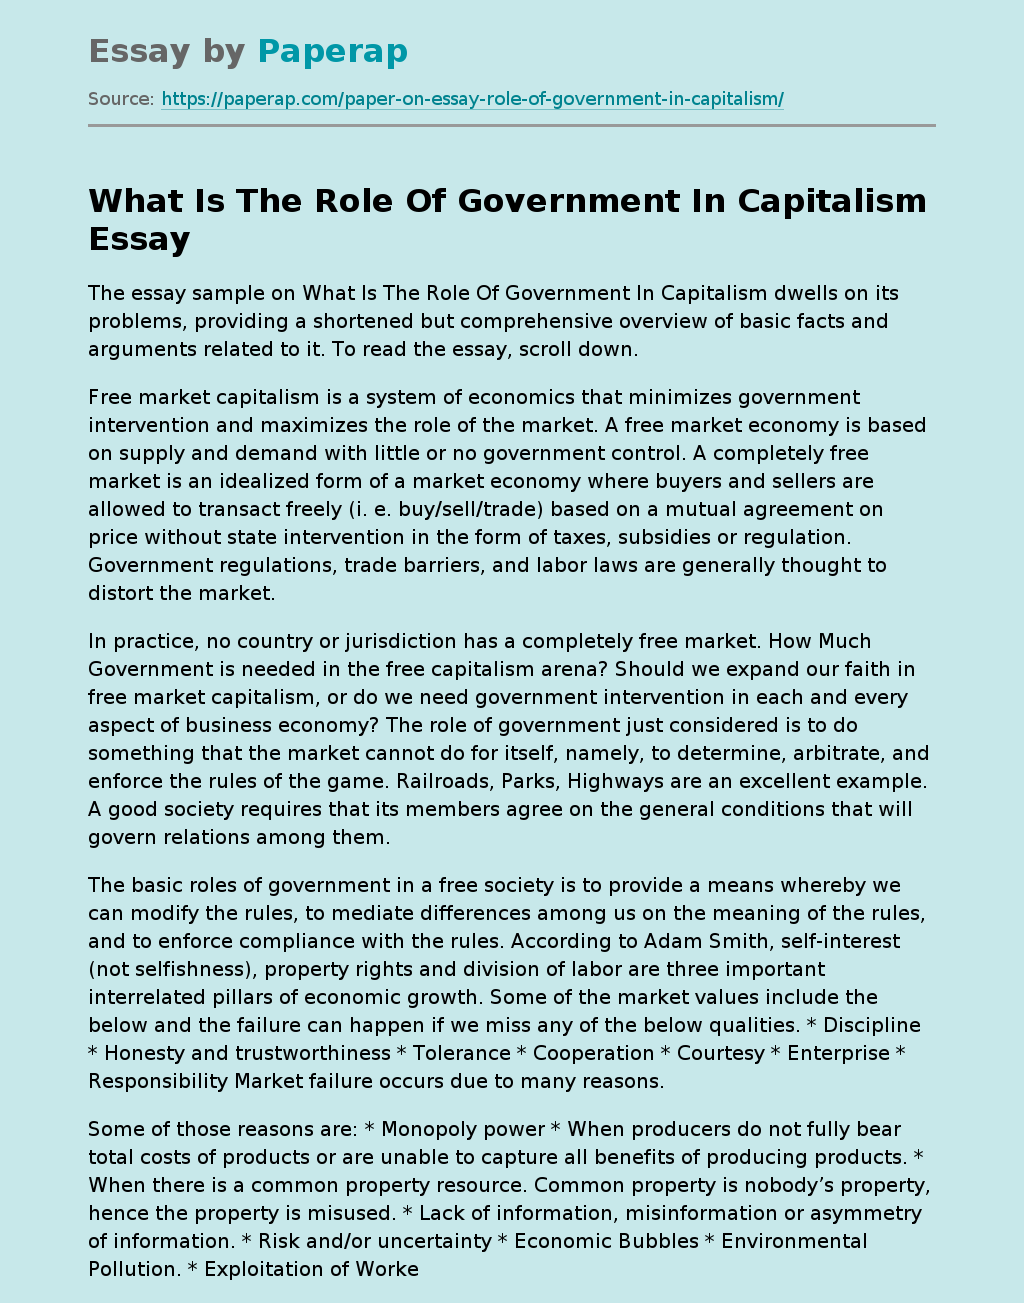 What Is The Role Of Government In Capitalism